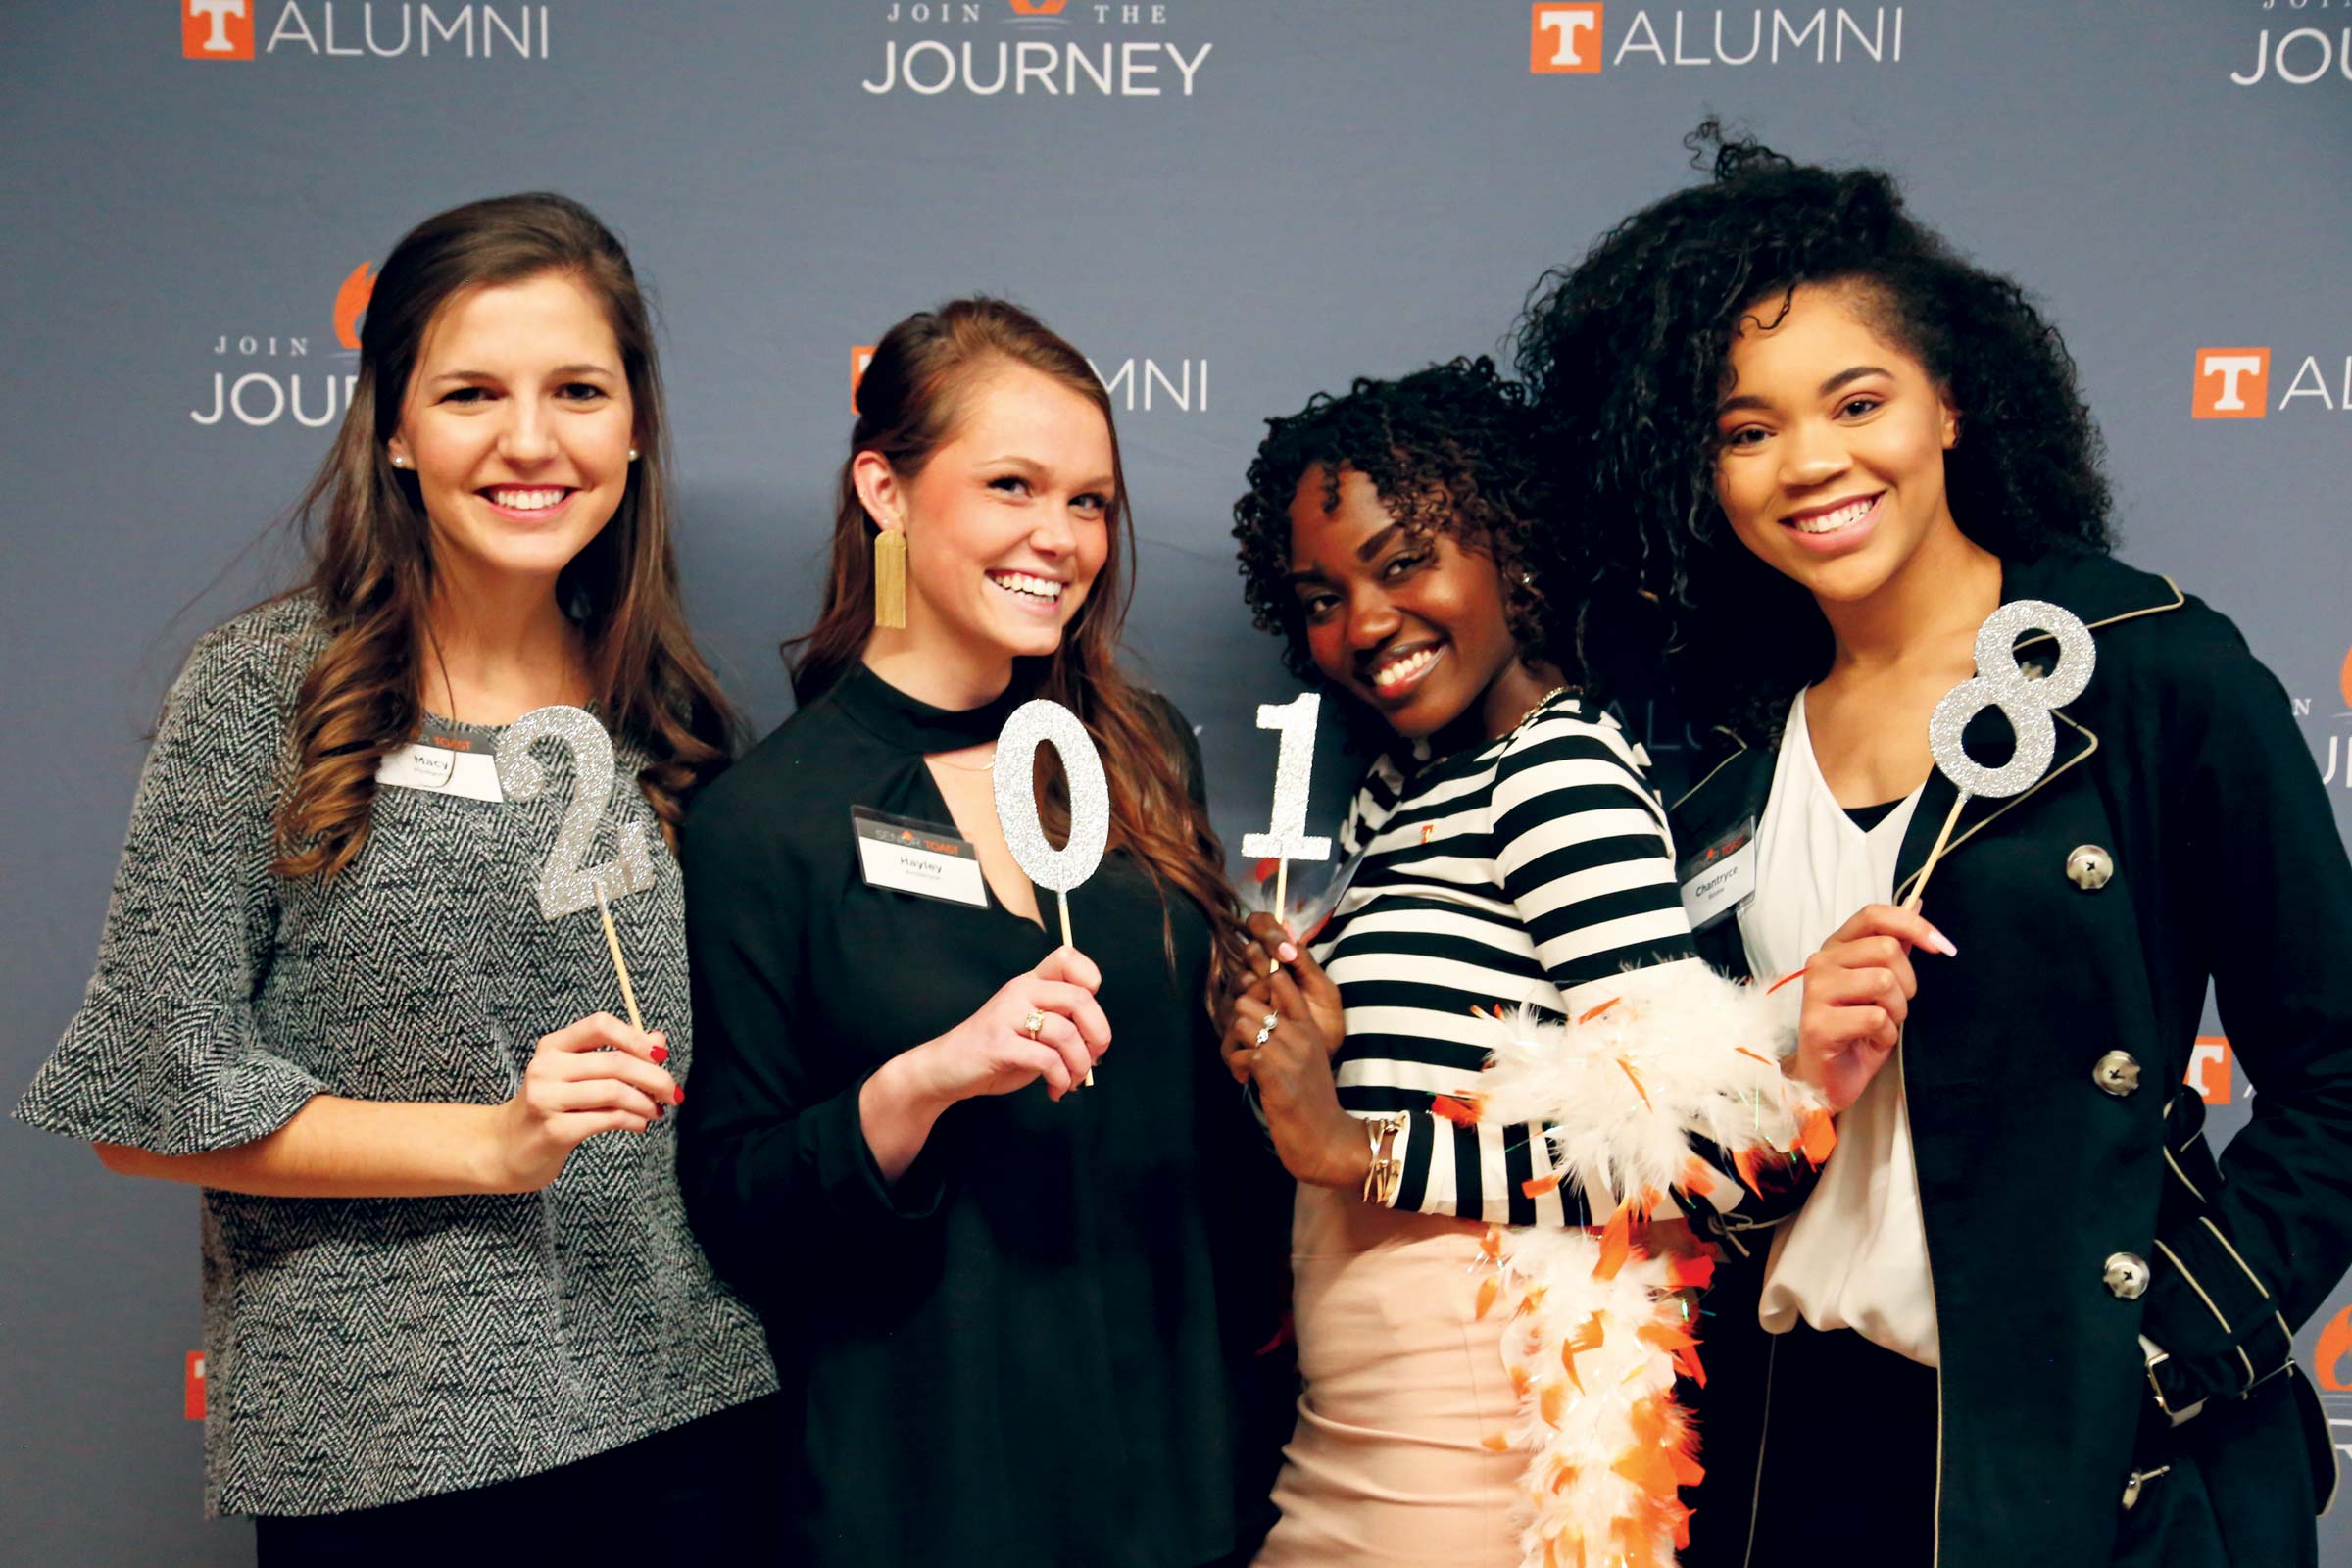 4 women from the UT Knoxville class of 2018 holding glitter-covered cardboard digits 2, 0, 1, and 8